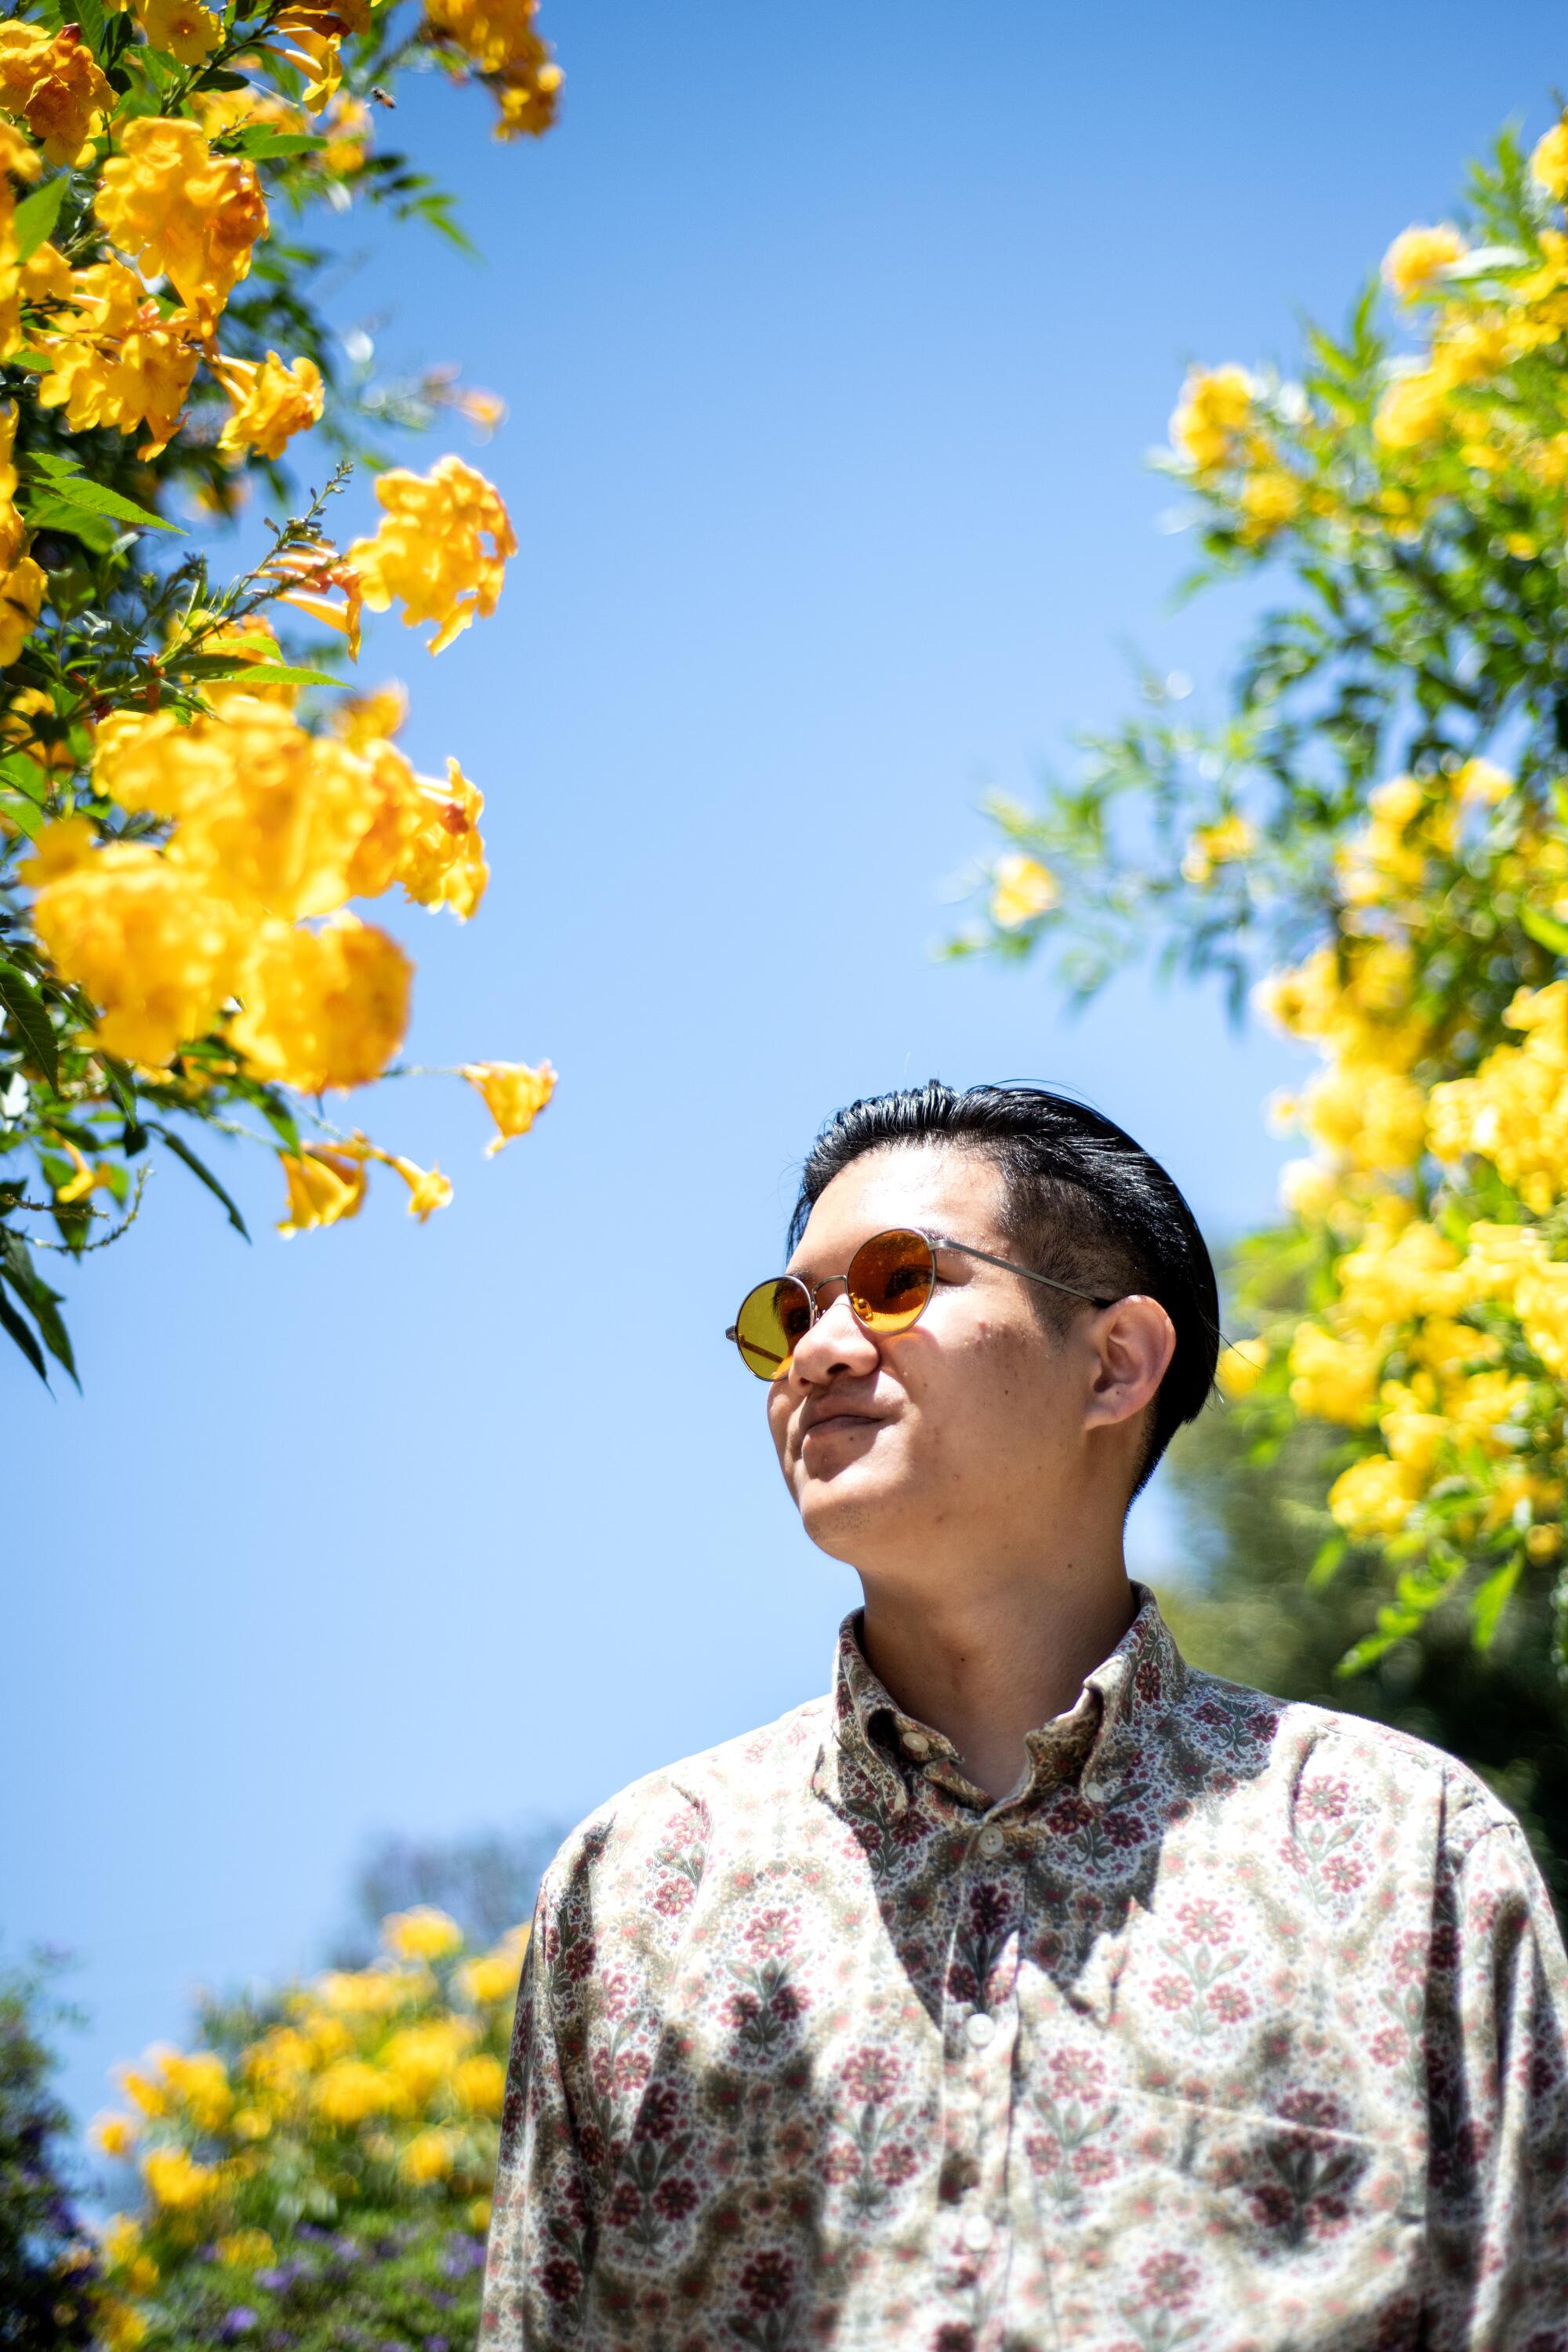 A man in a boldly patterned shirt and sunglasses stands amid yellow blooming trees.